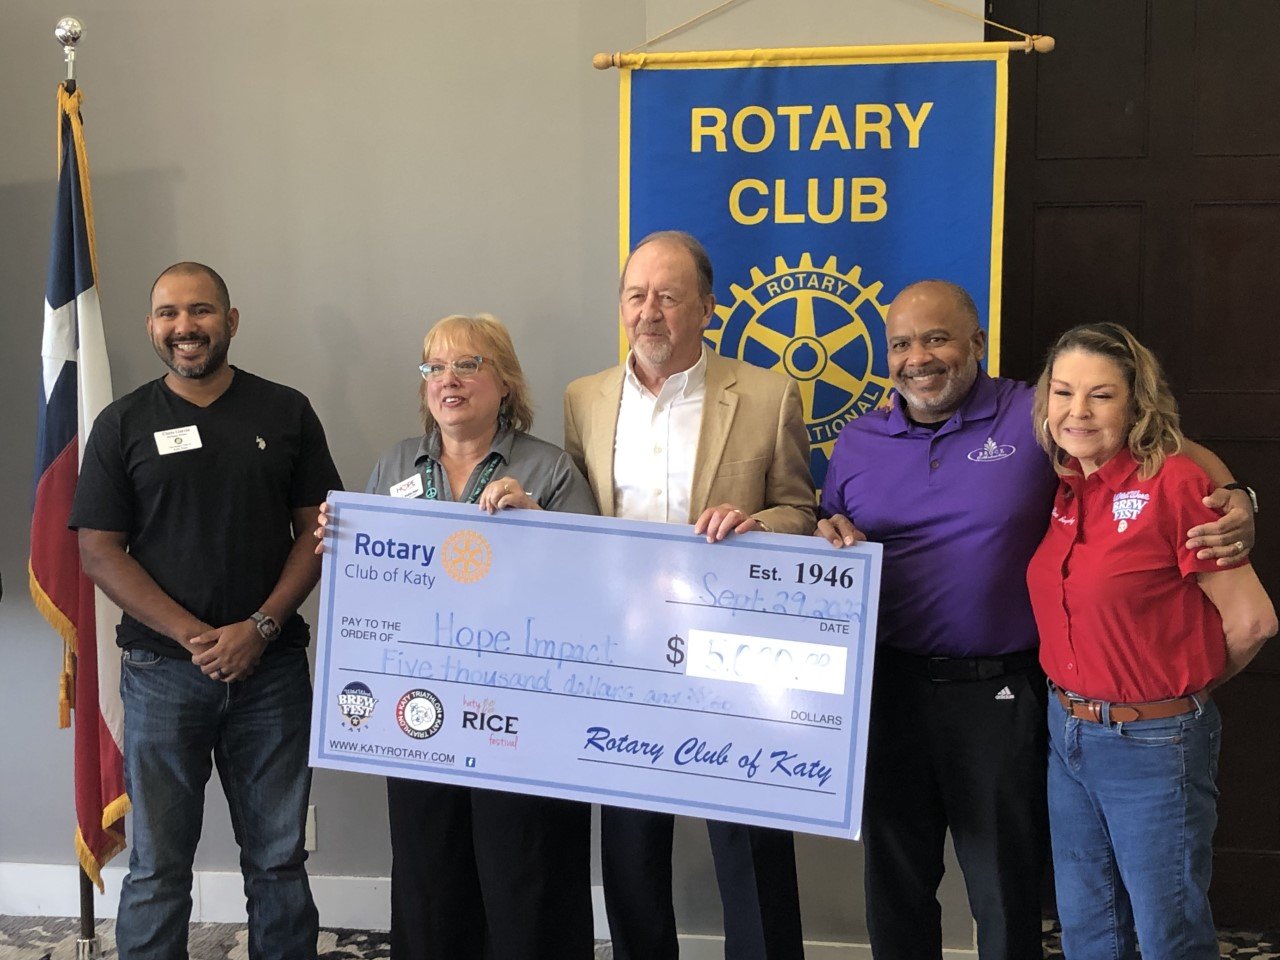 The Rotary Club of Katy made a donation to Hope Impacts, a local nonprofit focused on serving the homeless. Pictured from left to right are Chris Garcia, Tina Hatcher, Mitchell Tillman, Ralph Brock and Dee Dee Gonzalez.